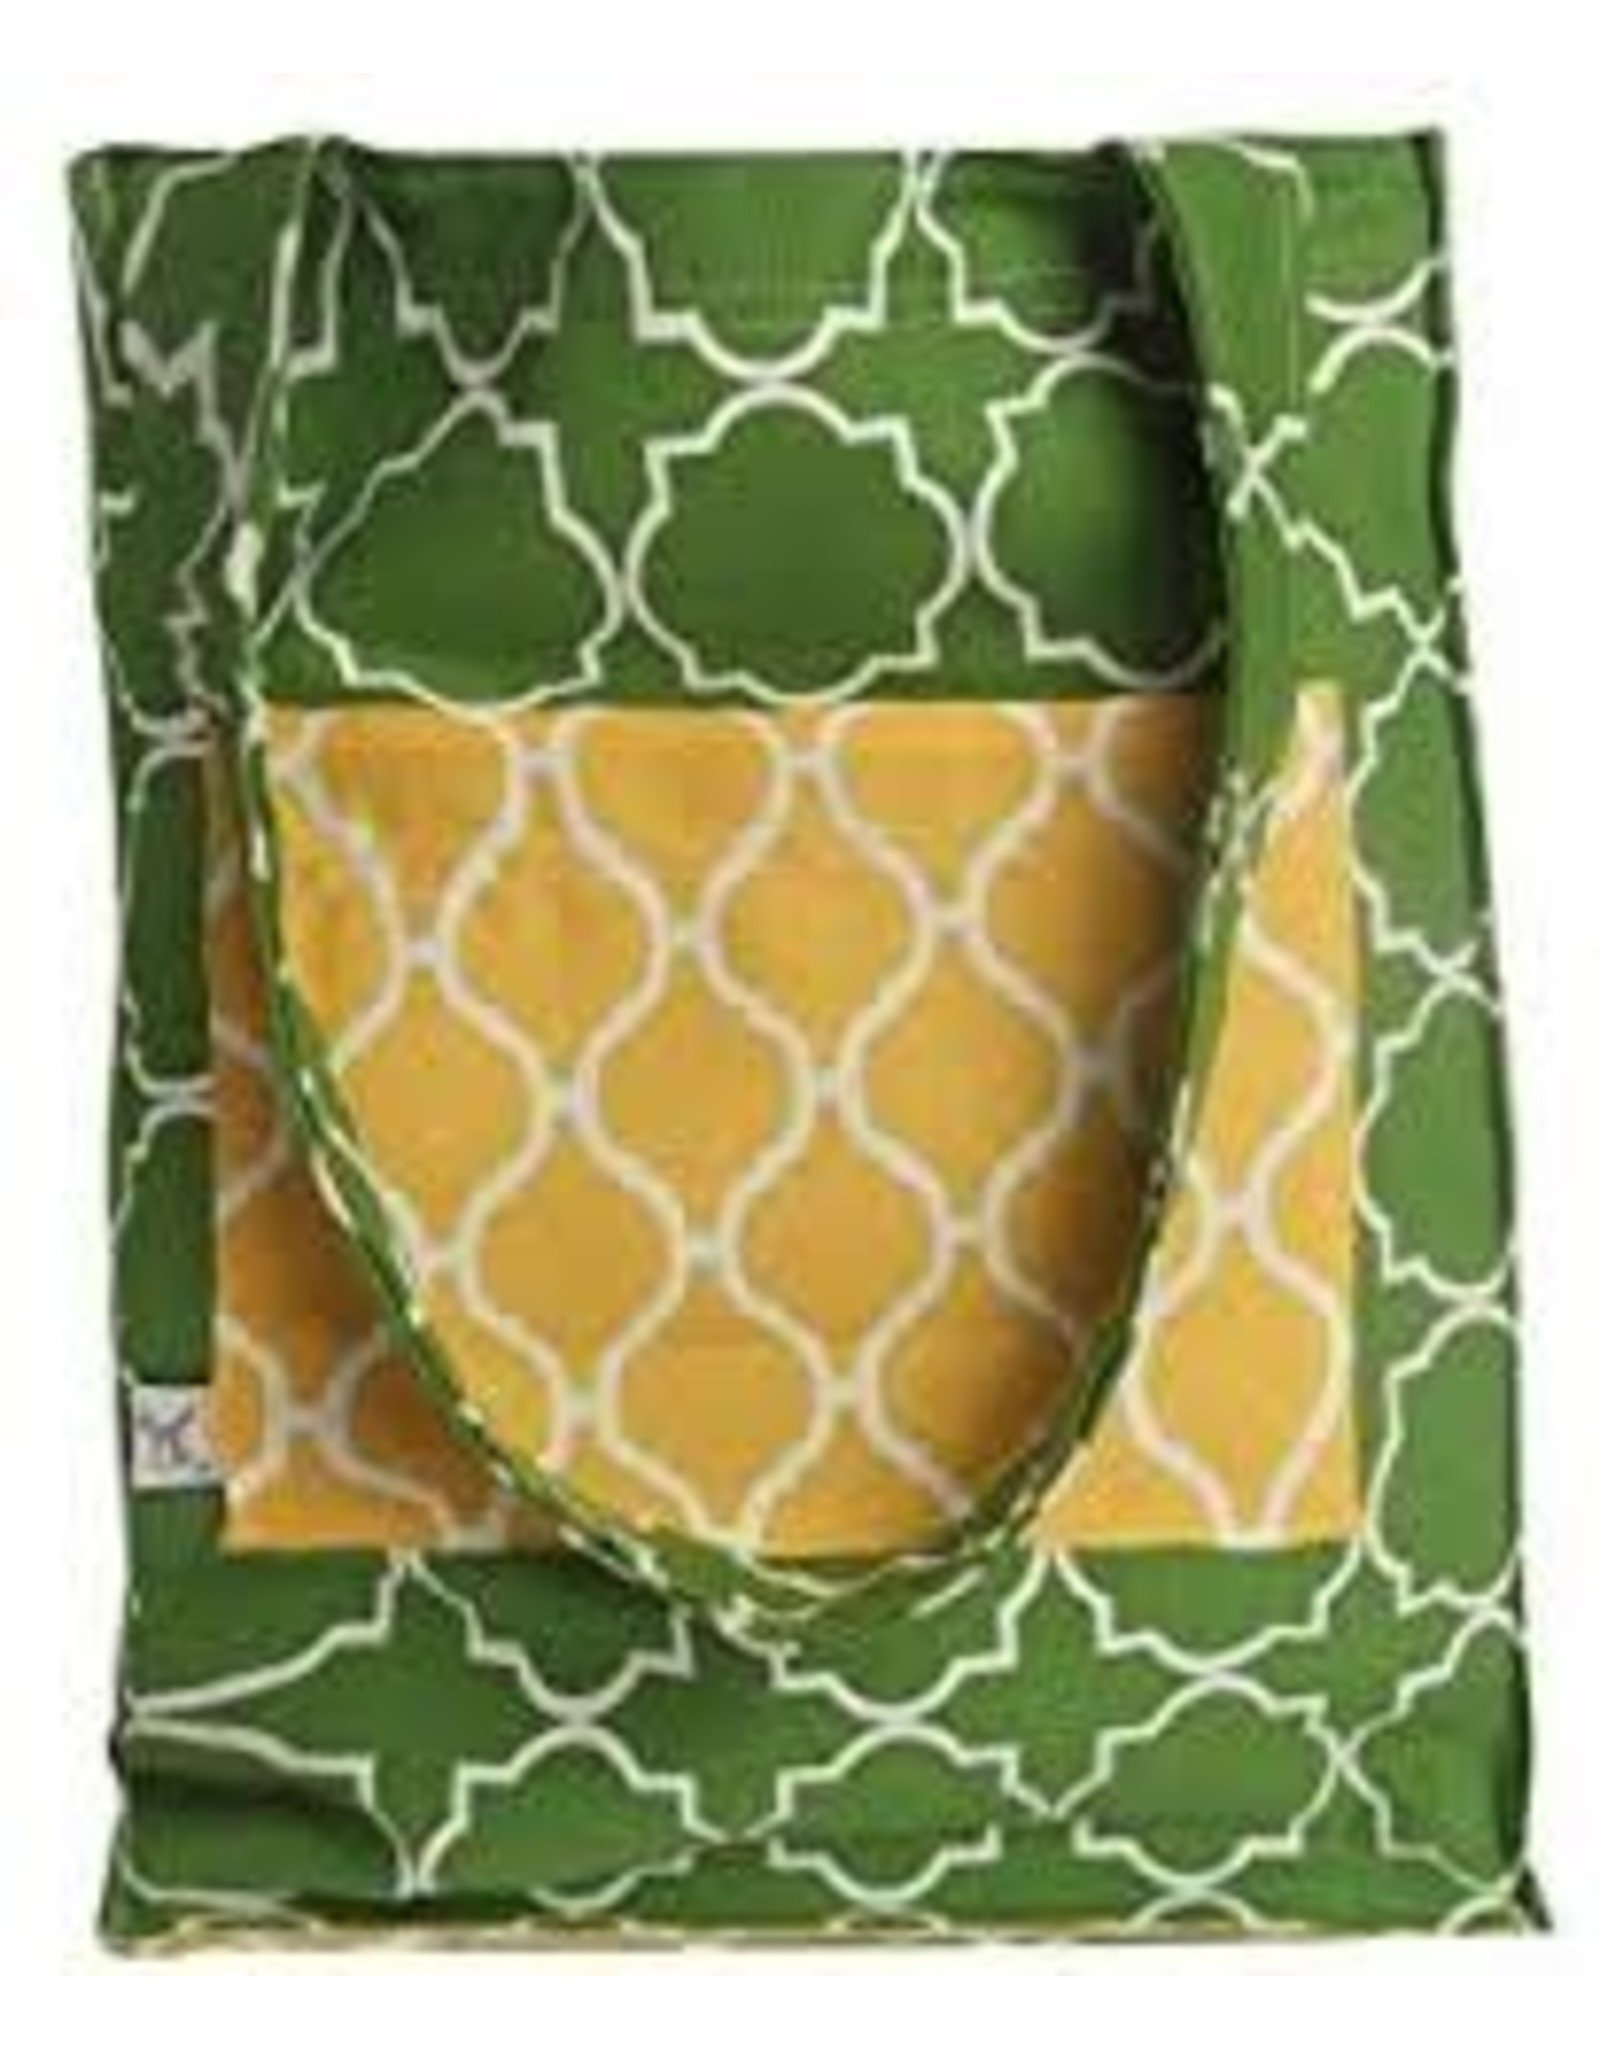 MOLLYMUTT MOLLY MUTT TOTE BAG ALL COLORS